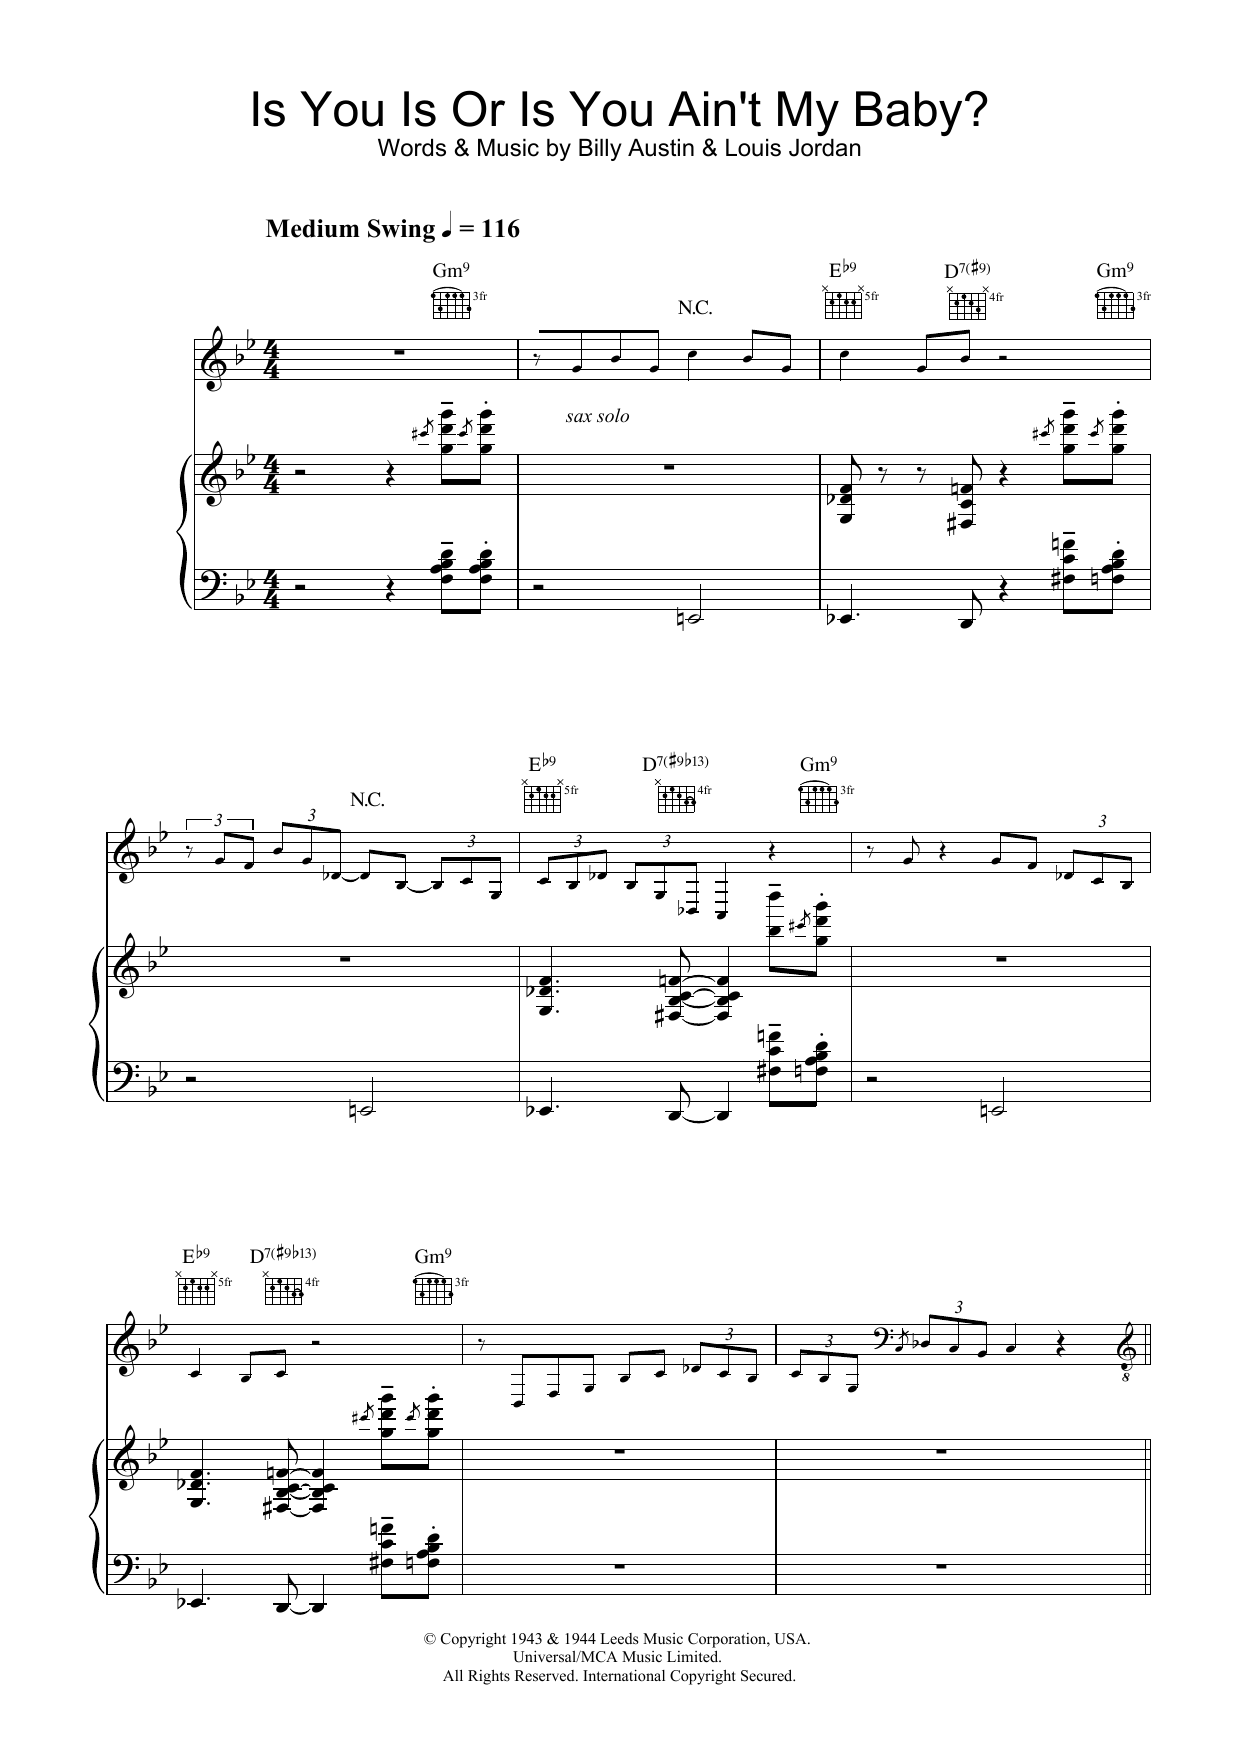 Diana Krall Is You Is Or Is You Ain't My Baby? sheet music notes and chords. Download Printable PDF.